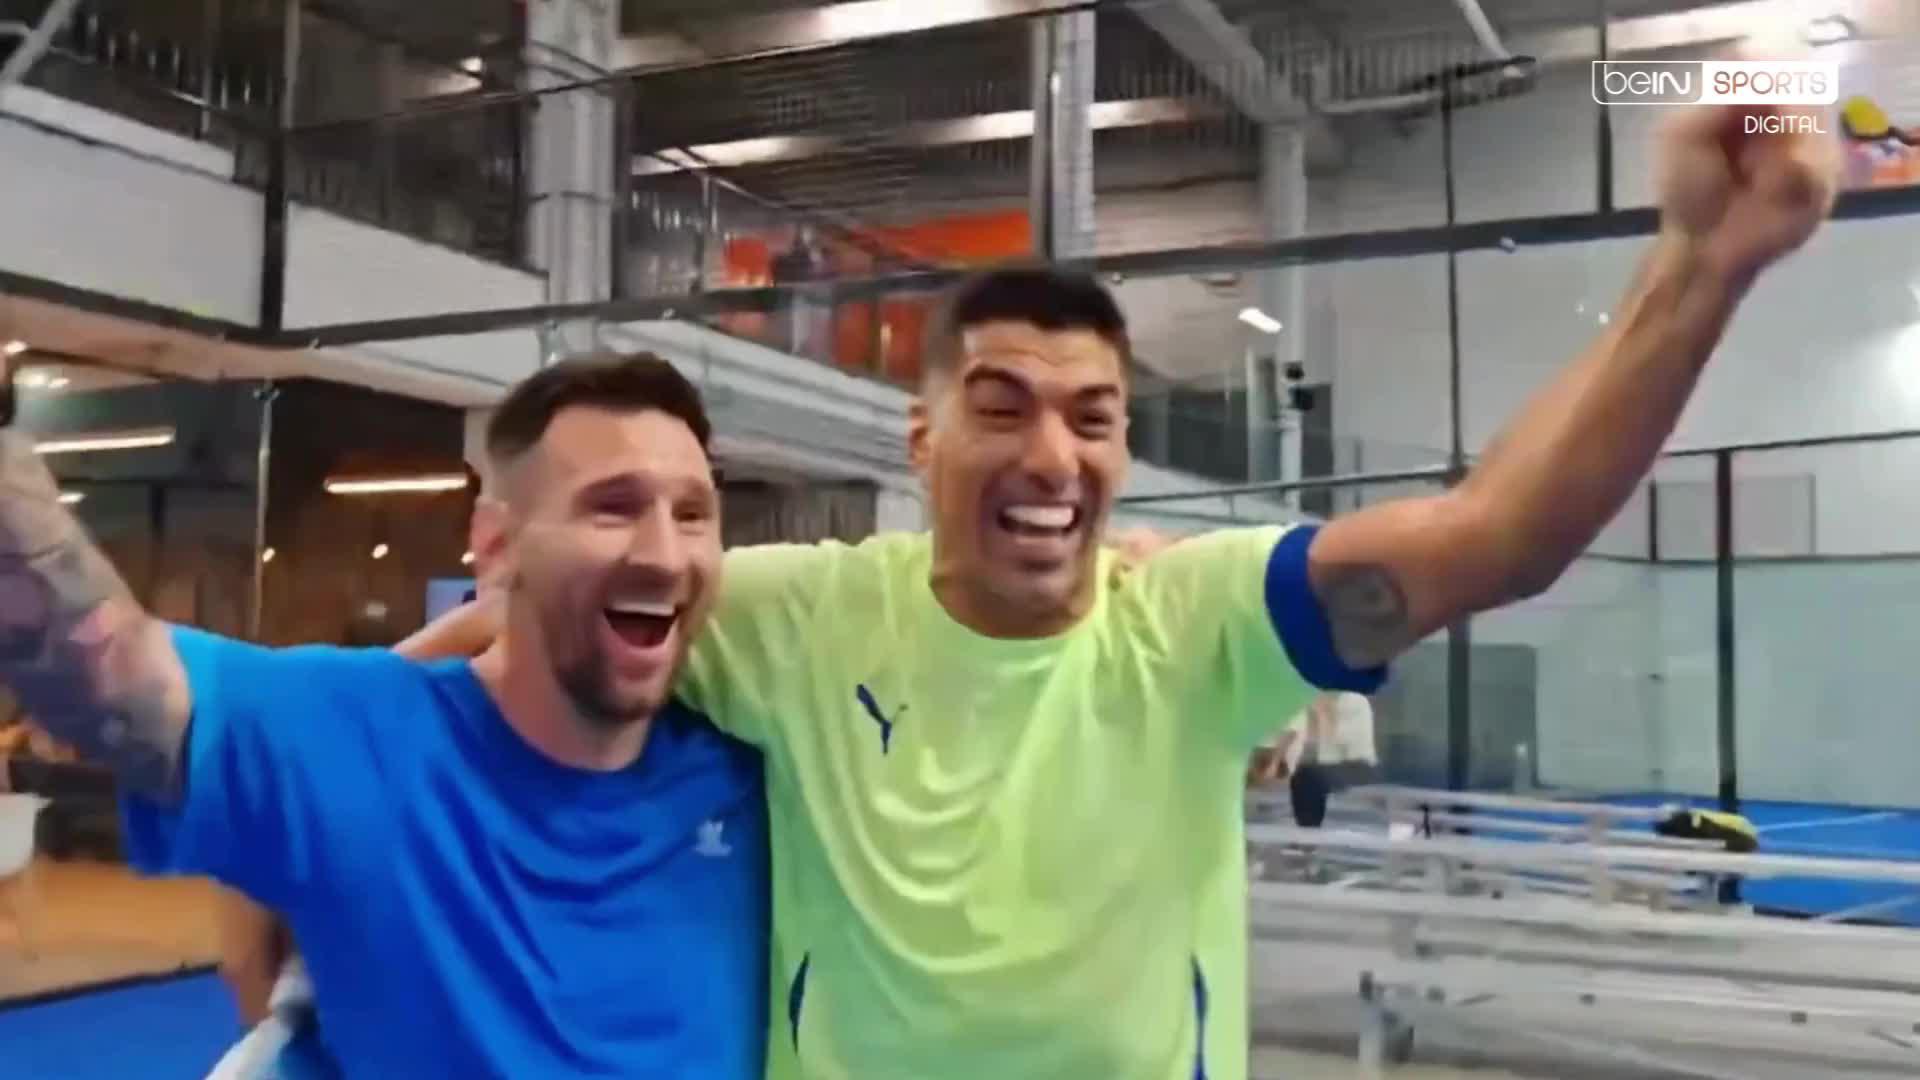 Lionel Messi  Luis Suárez   The duo that dominates the football world ⚽️ now wants to conquer Padel 